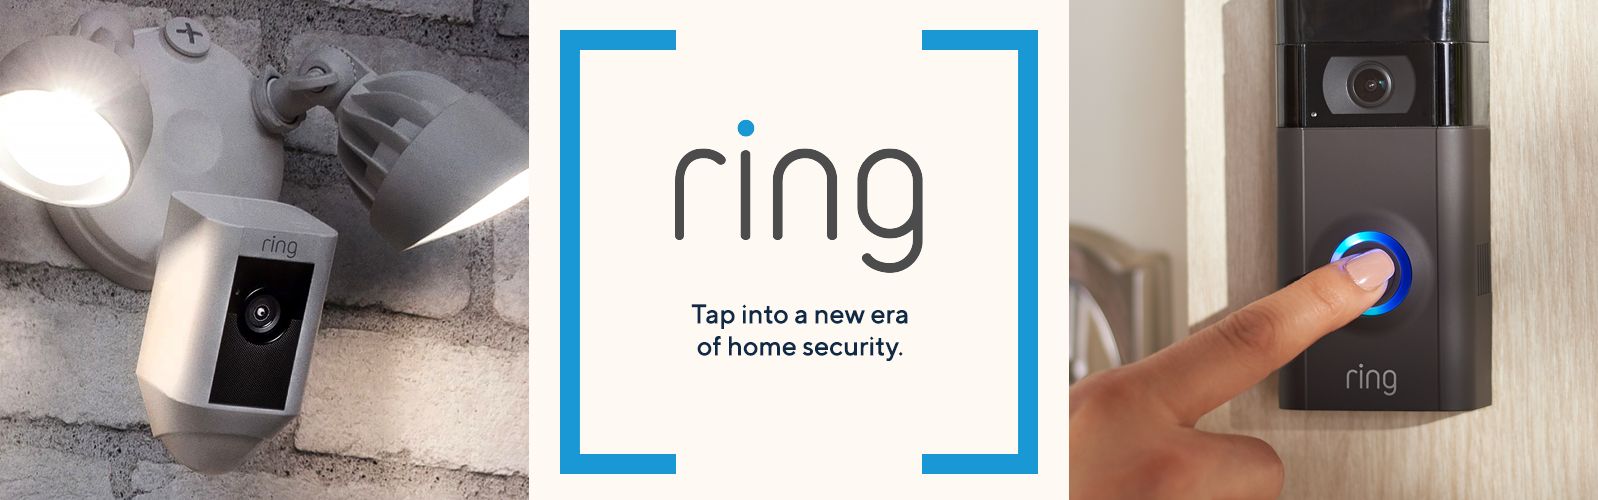 Use a Ring Doorbell Pro with your Samsung smart TV, doorbell -  thirstymag.com